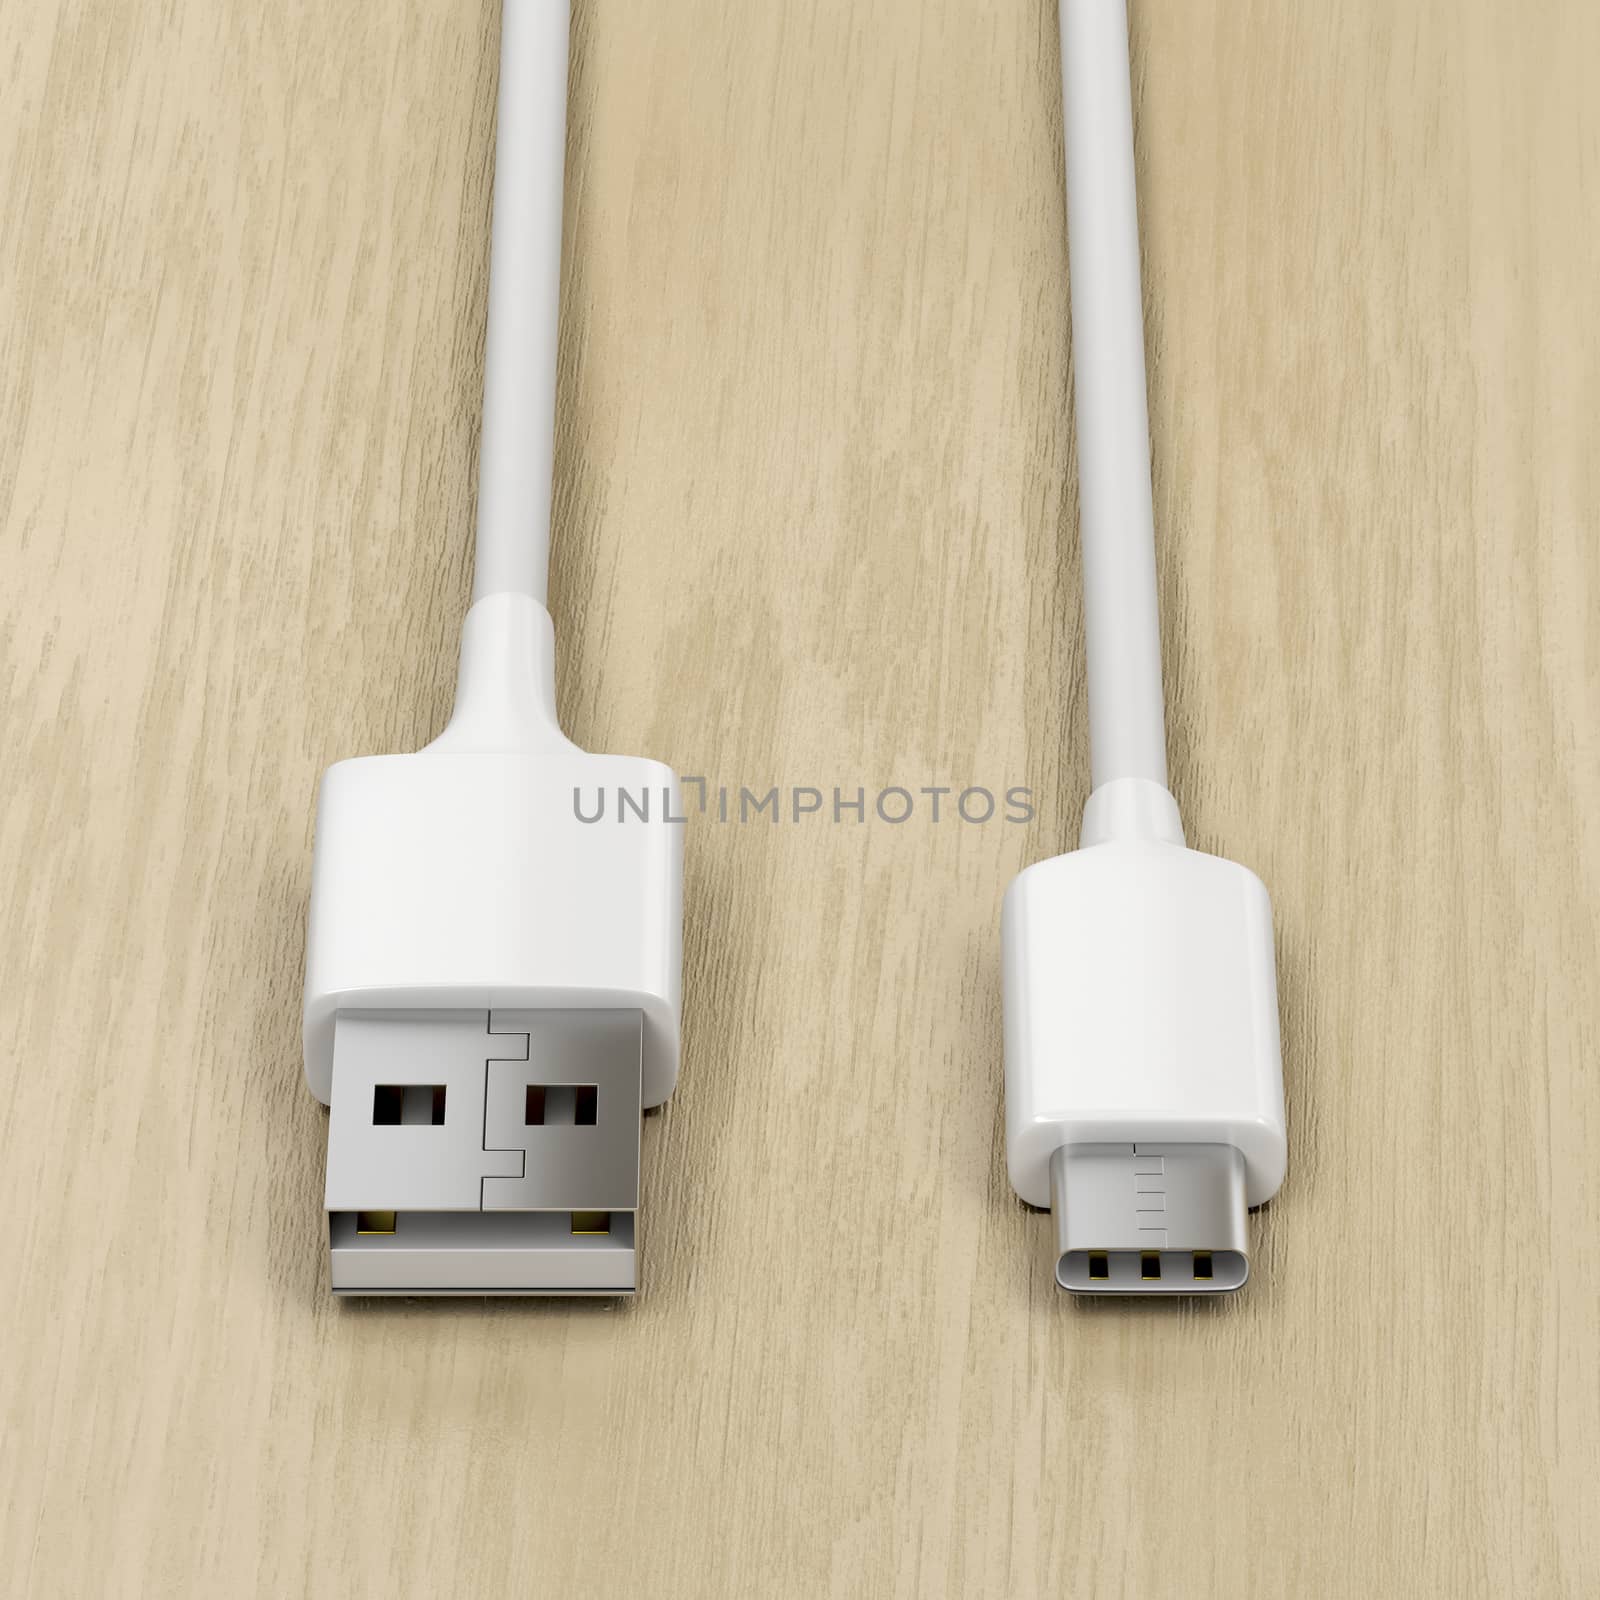 USB cables on wood by magraphics